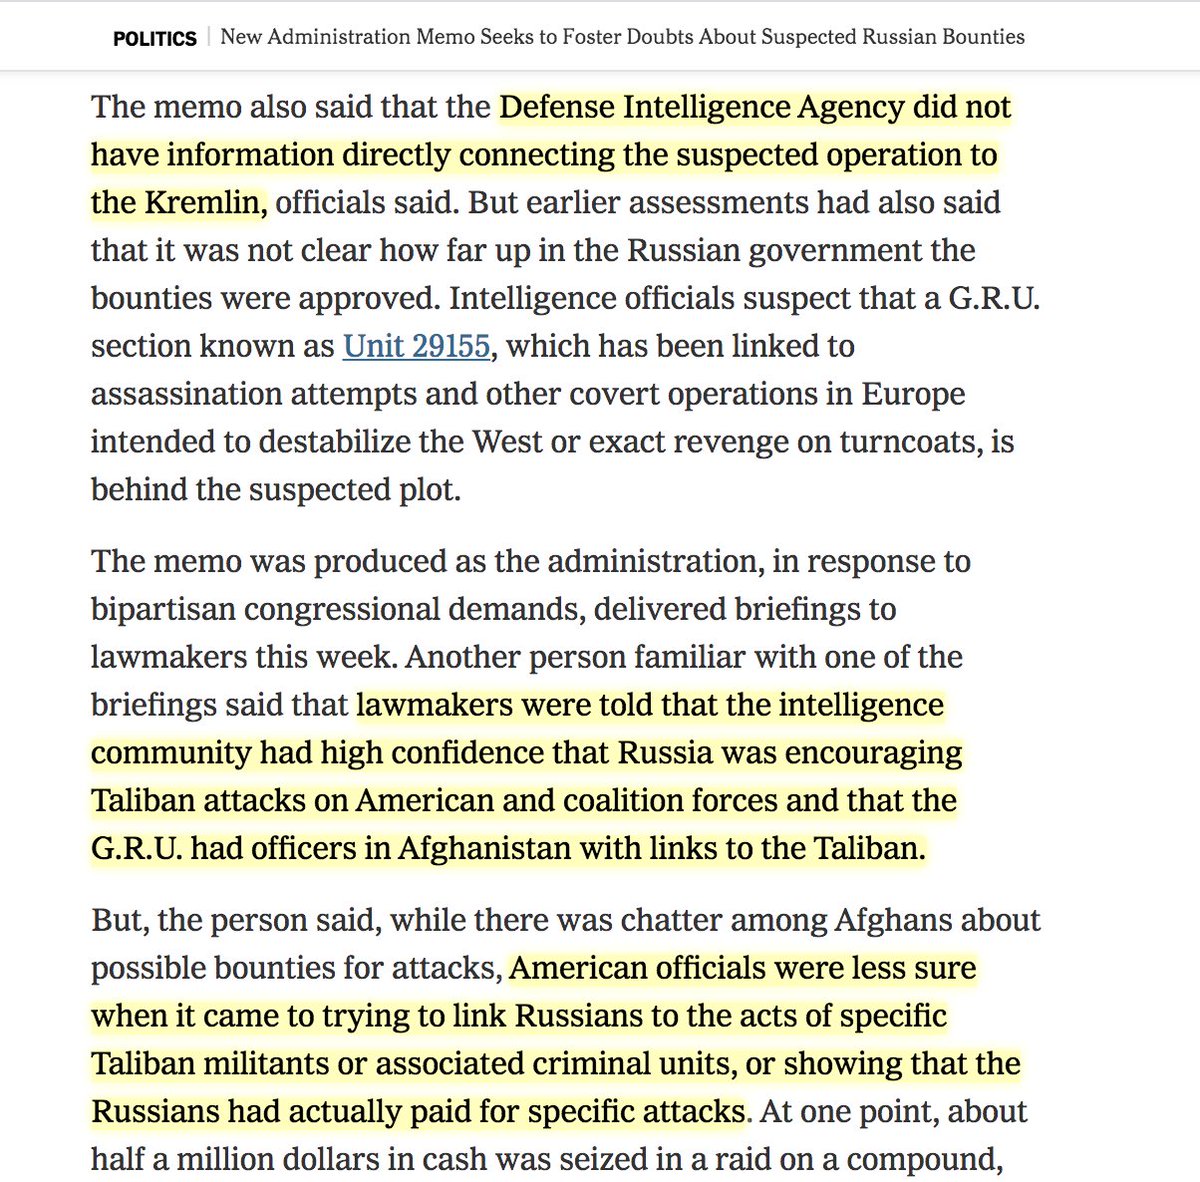 Risen & Cole omit -- as they did in their earlier story -- that, *at most*, CIA had "medium confidence" in bounty allegation -- & that other agencies, DIA & NSA, had strong doubts. This late official, Anthony Schinella, was CIA. So he would have had ZERO impact on others' doubts.